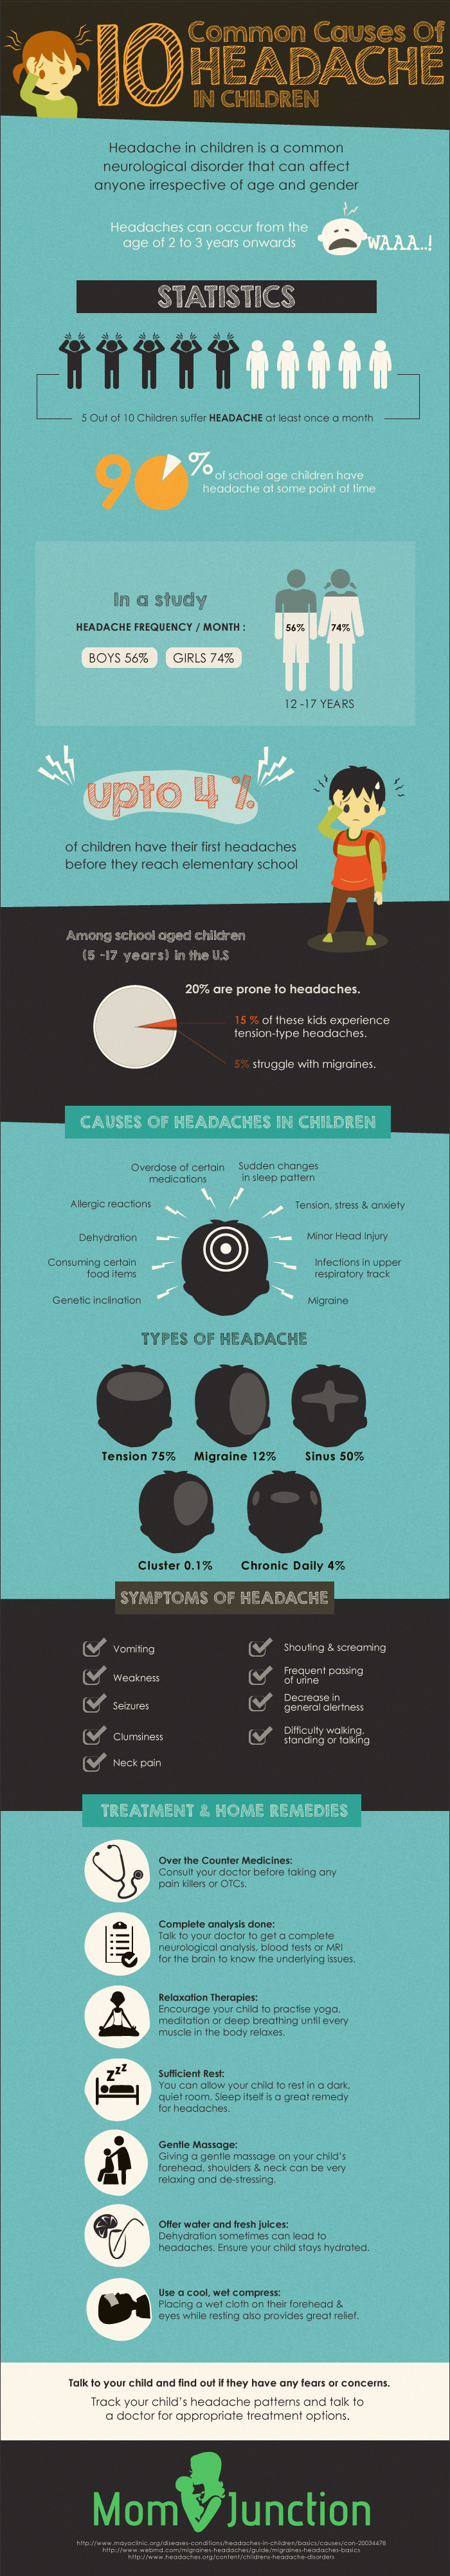 Causes & Treatments For Headache In Children